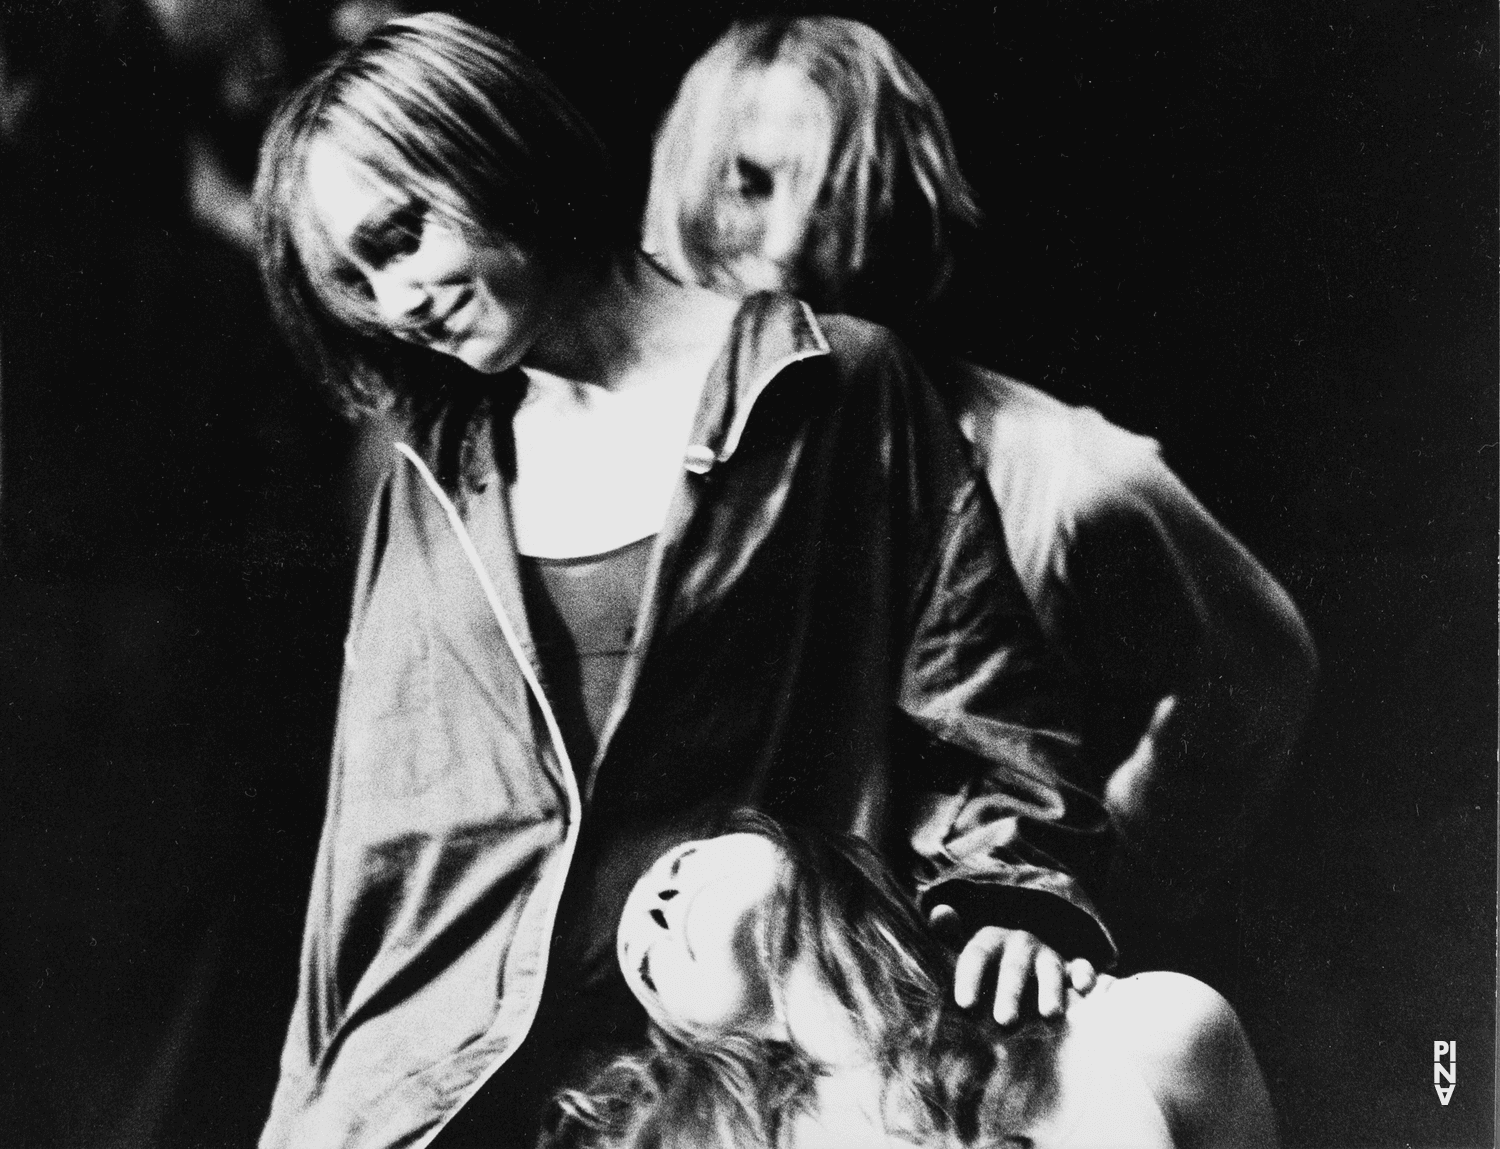 Dominique Mercy, Marlis Alt and Vivienne Newport in “Fritz” by Pina Bausch